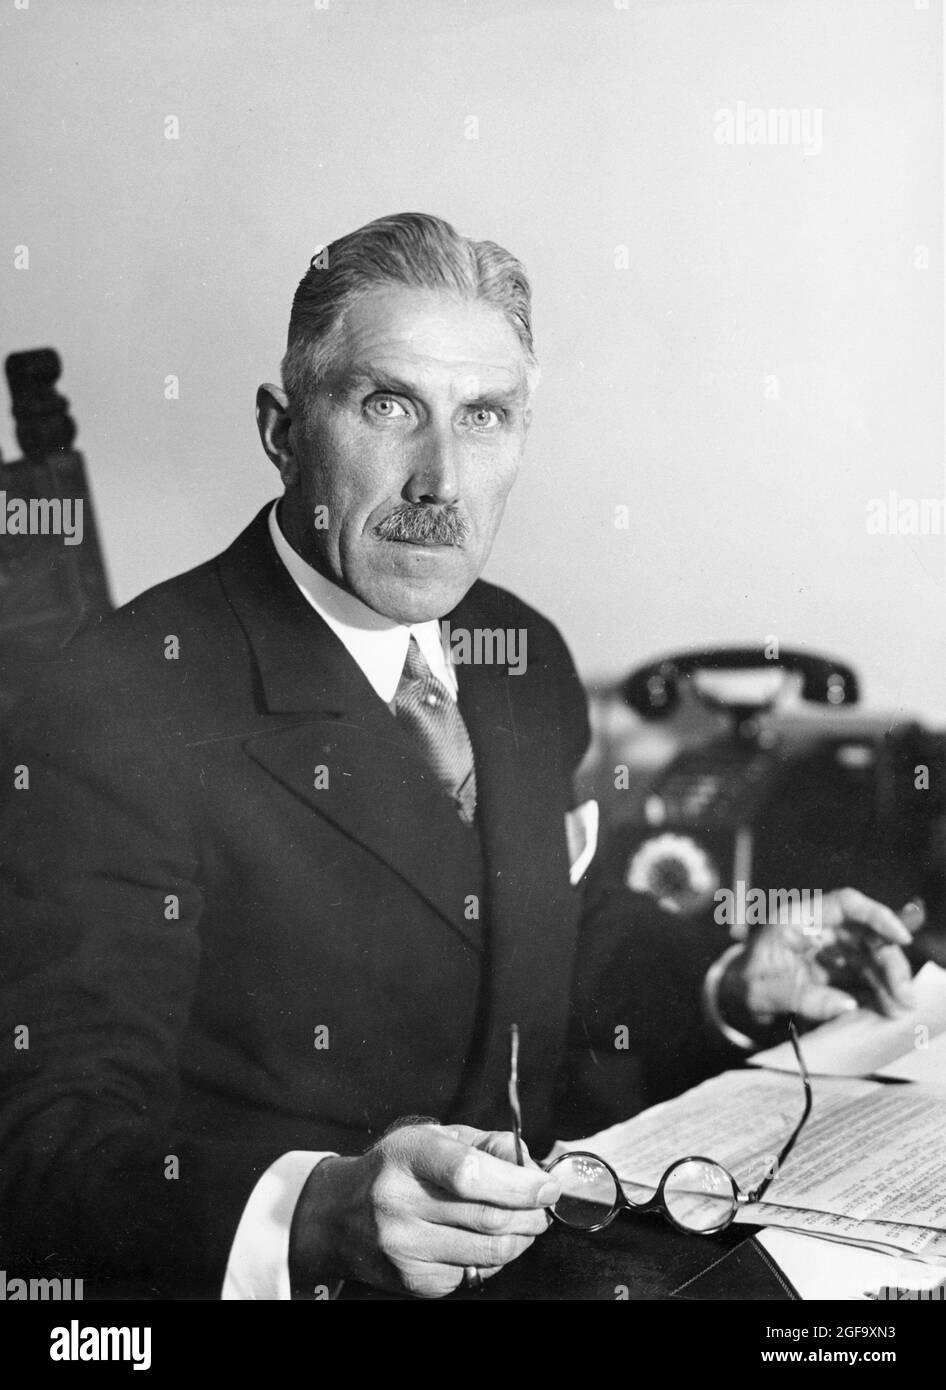 The German politician Franz von Papen in 1933. His recommendation to Hindenburg that Hitler be made Chancellor with himself (von Papen) as Vice Chancellor makes him one of the main culprits of the start of Nazi control of Germany. He died in 1969. Credit: German Bundesarchiv Stock Photo